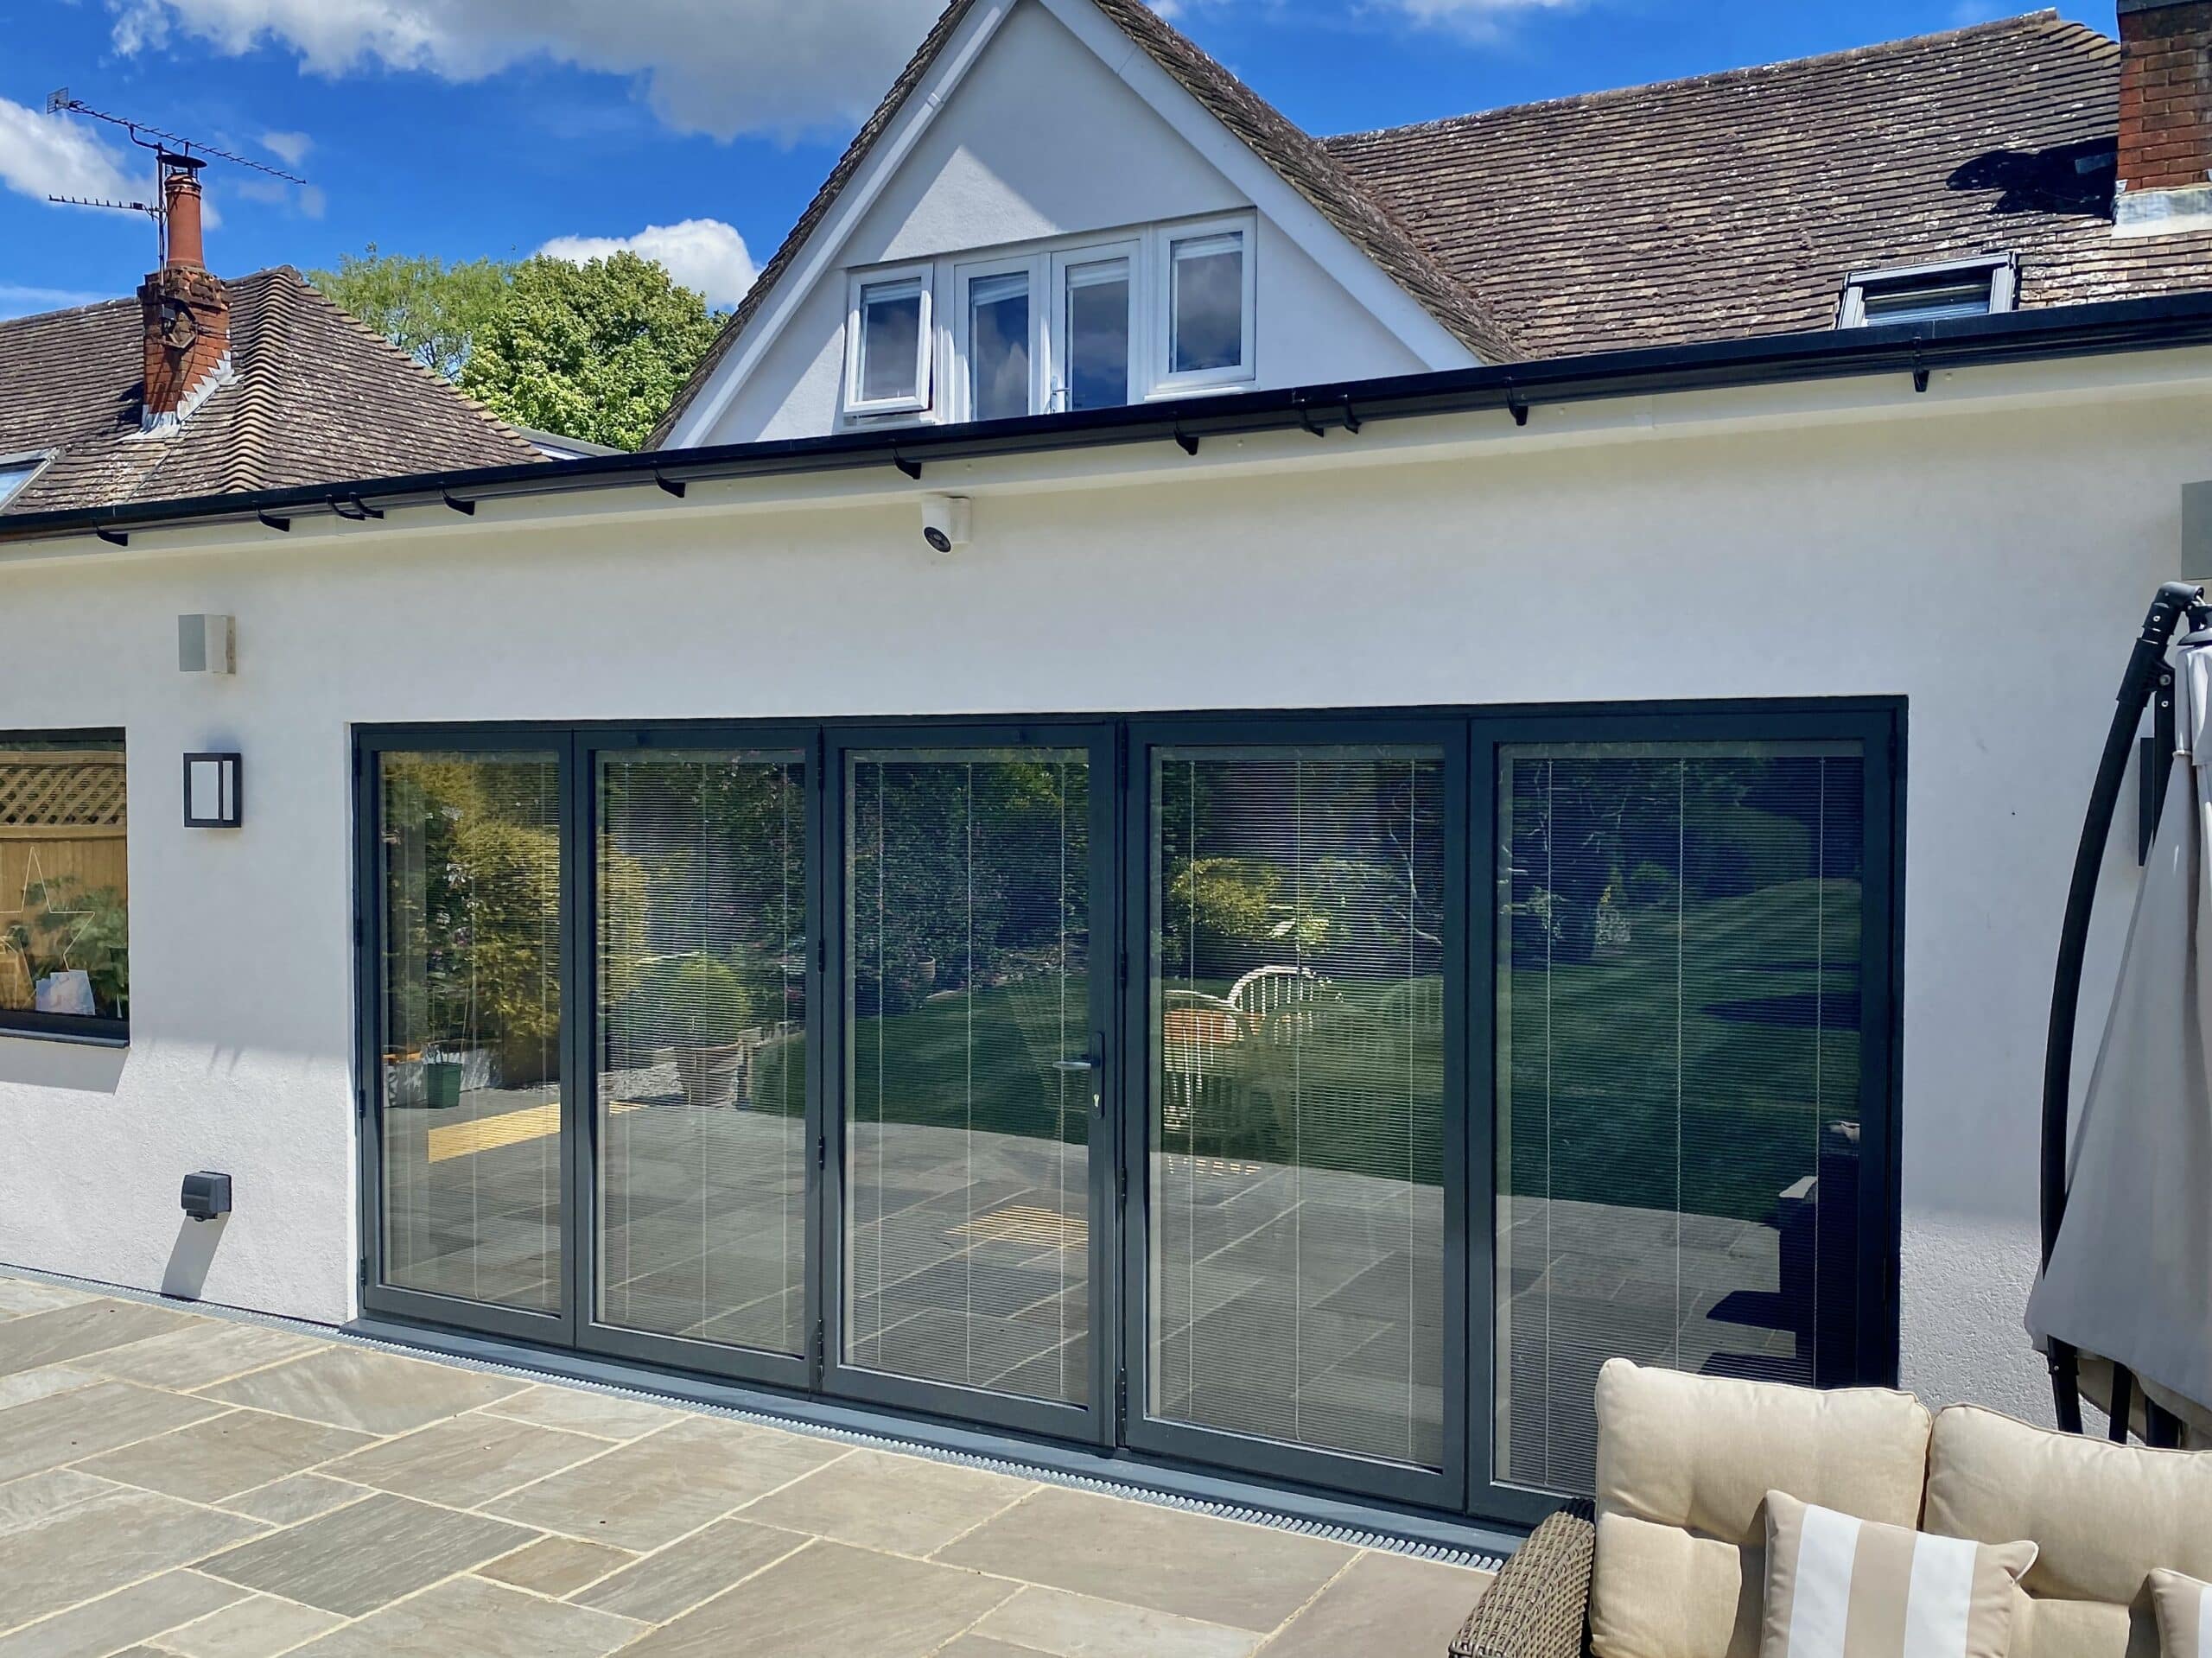 Alunet BF73 bifold doors grey colour, closed outside view with integral blinds. 